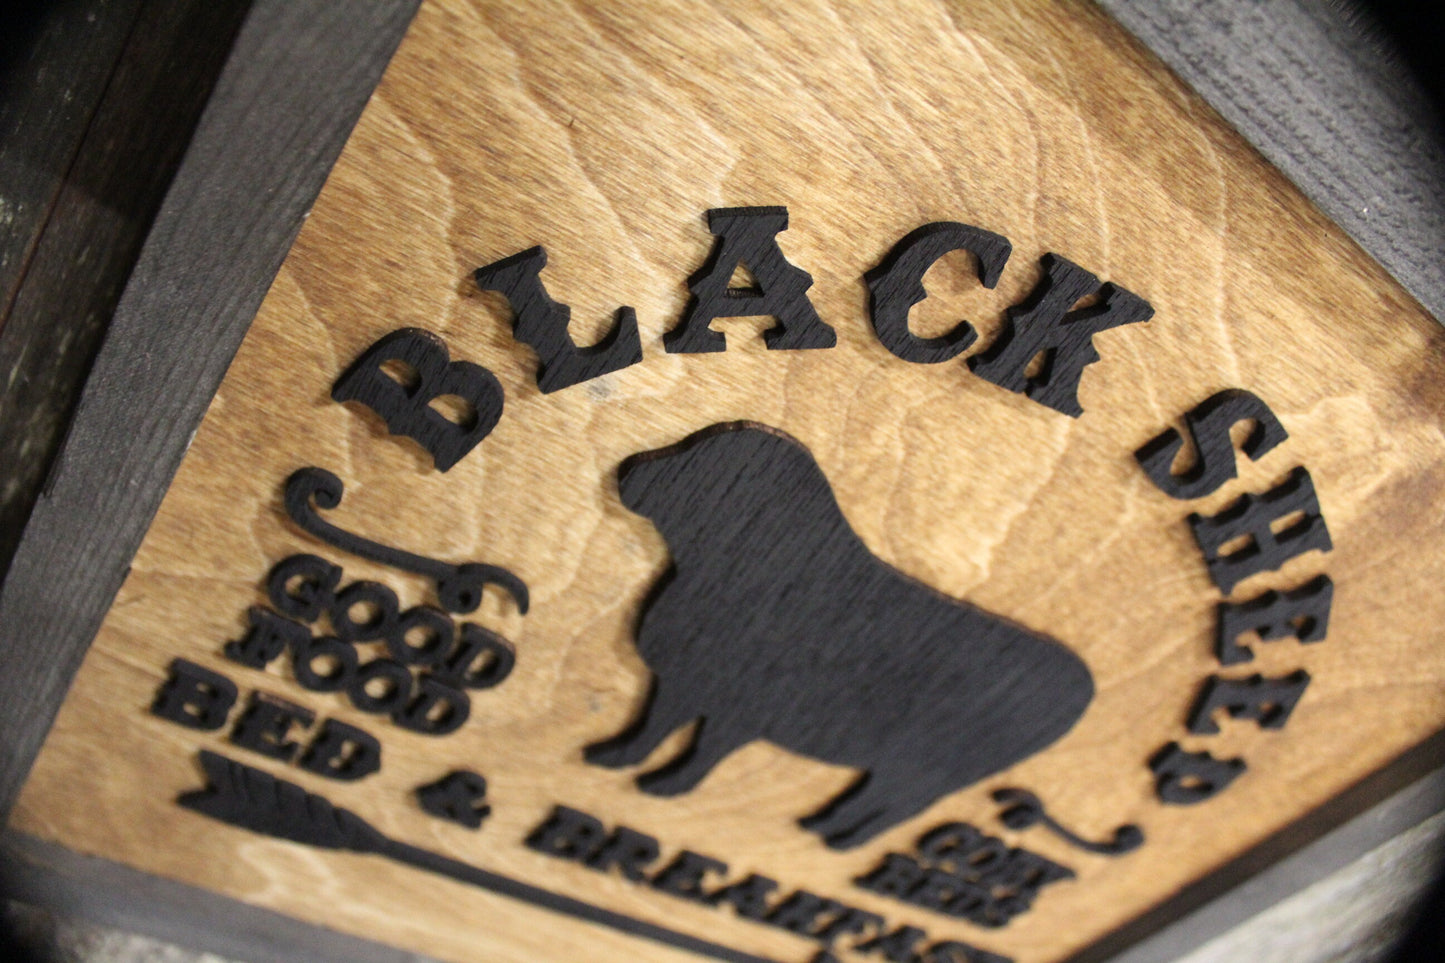 Black Sheep BNB Wood Sign Bed and Breakfast 3D Raised Text Cozy Beds Good Food Advertising Farm House Country Decor Kitchen Rustic Cabin